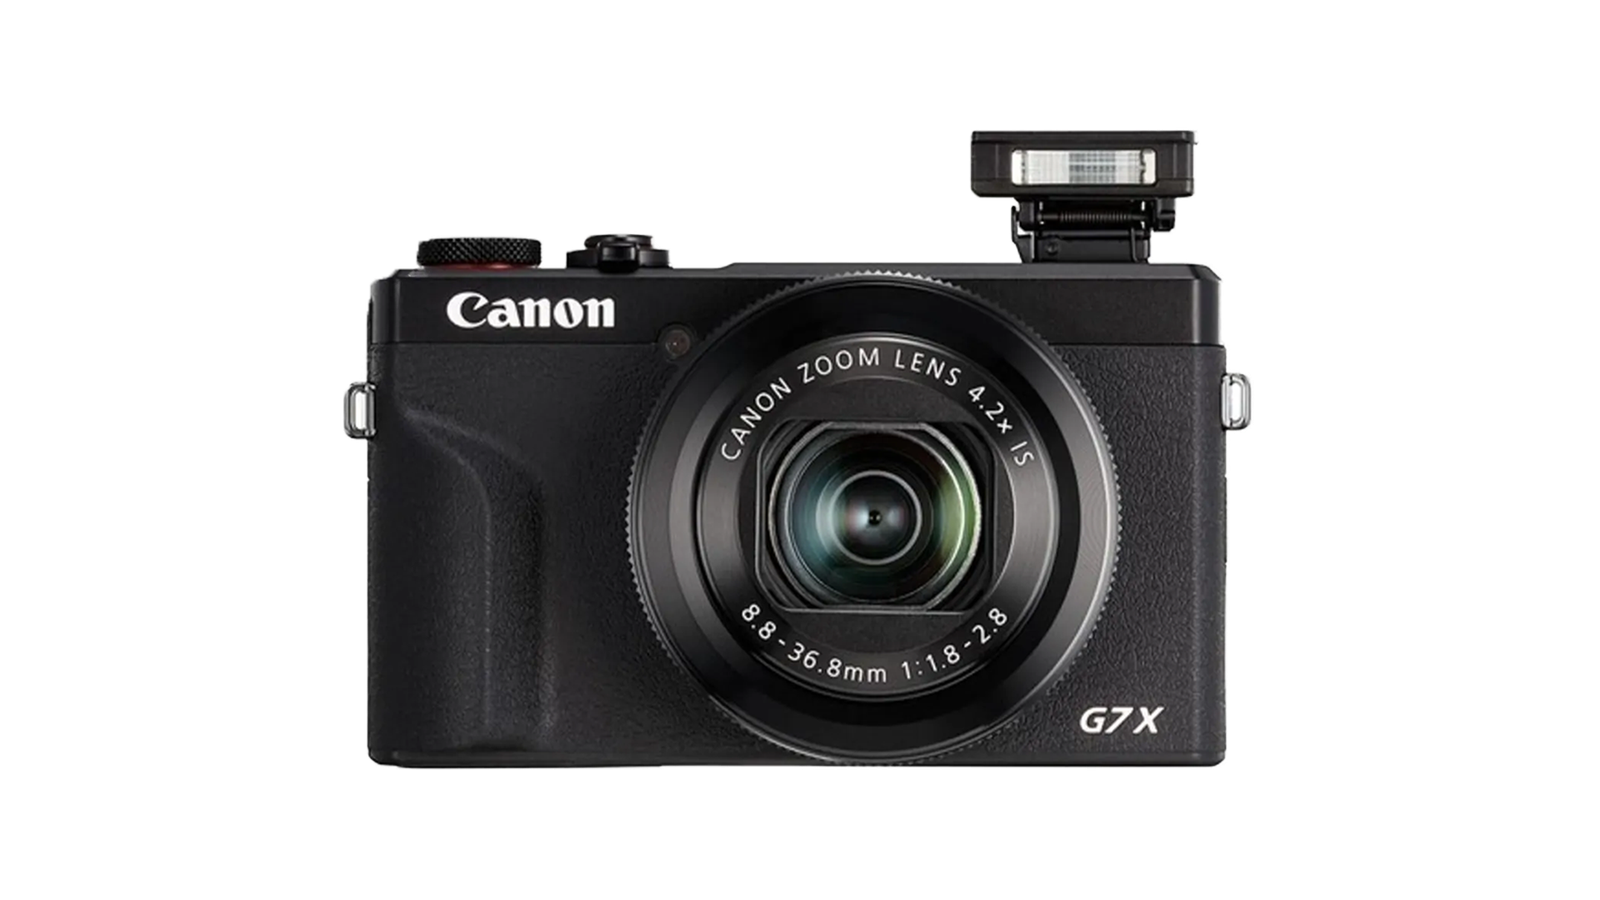 Canon PowerShot G7 X Mark III - Overall the best YouTube camera and the best Canon vlogging camera.